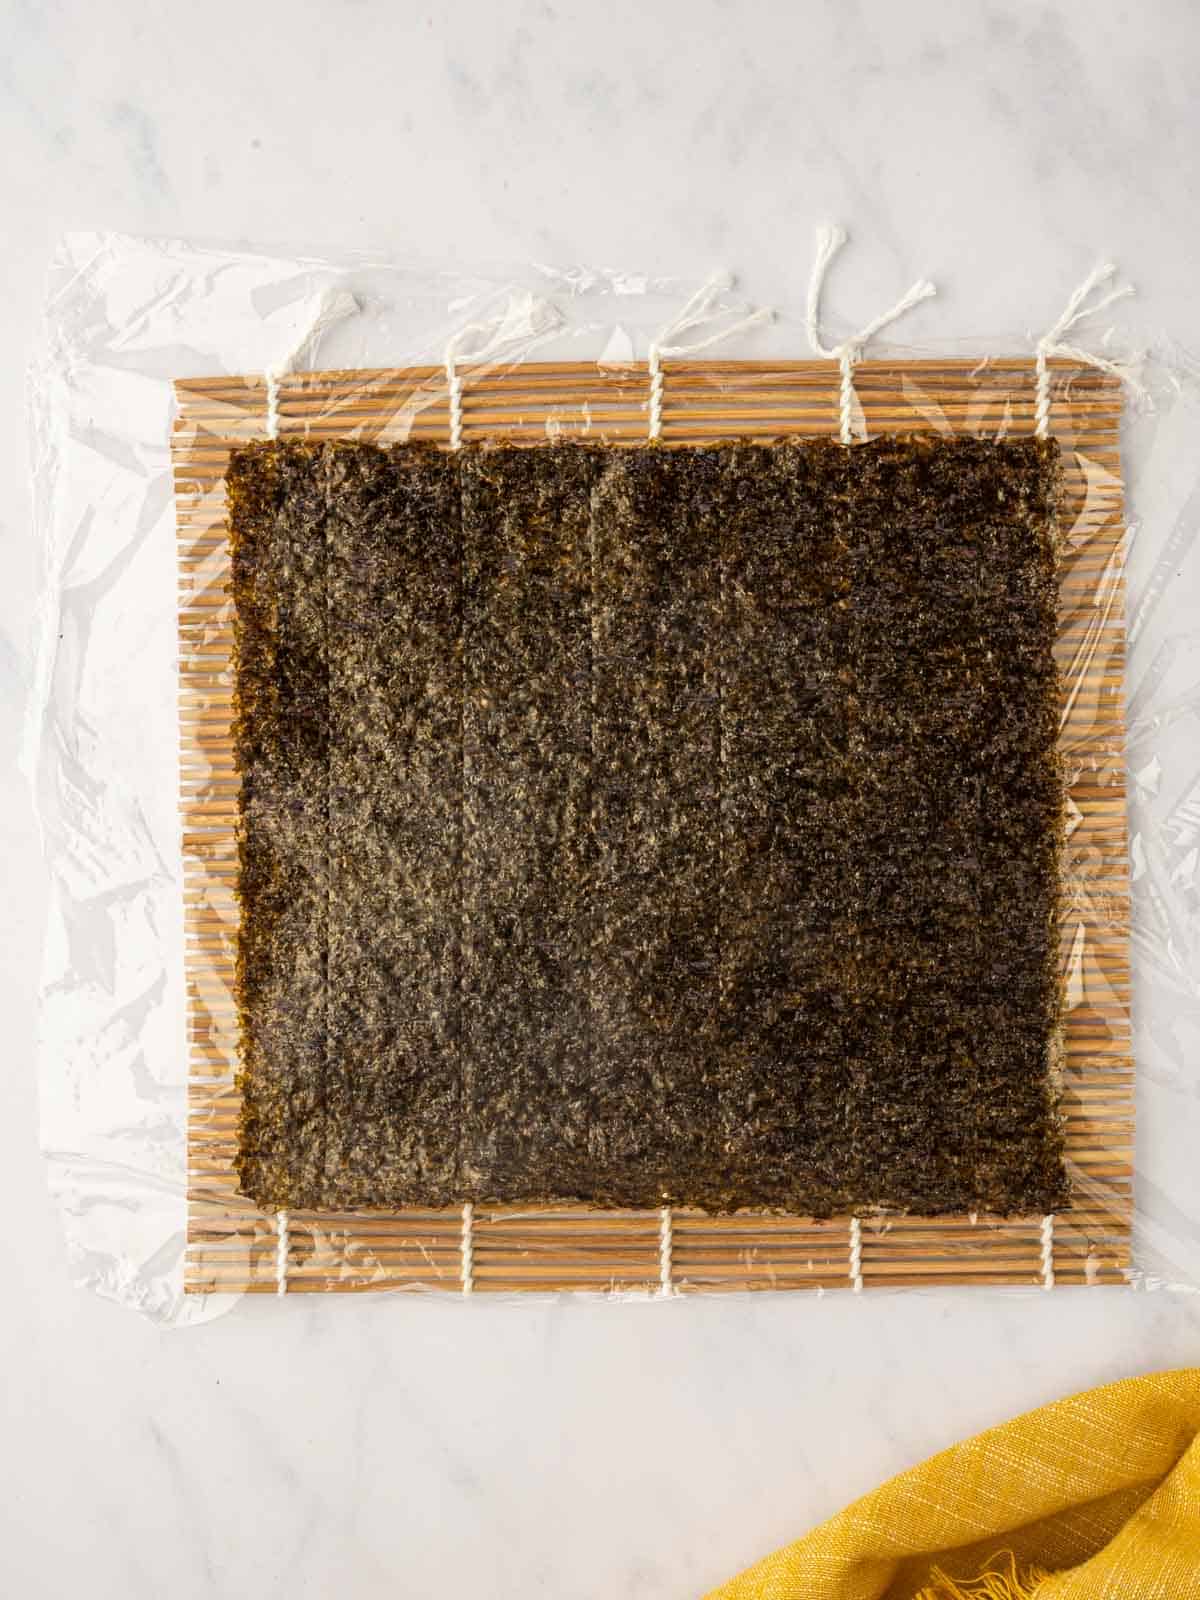 Lay a nori sheet over plastic wrap on a bamboo mat.